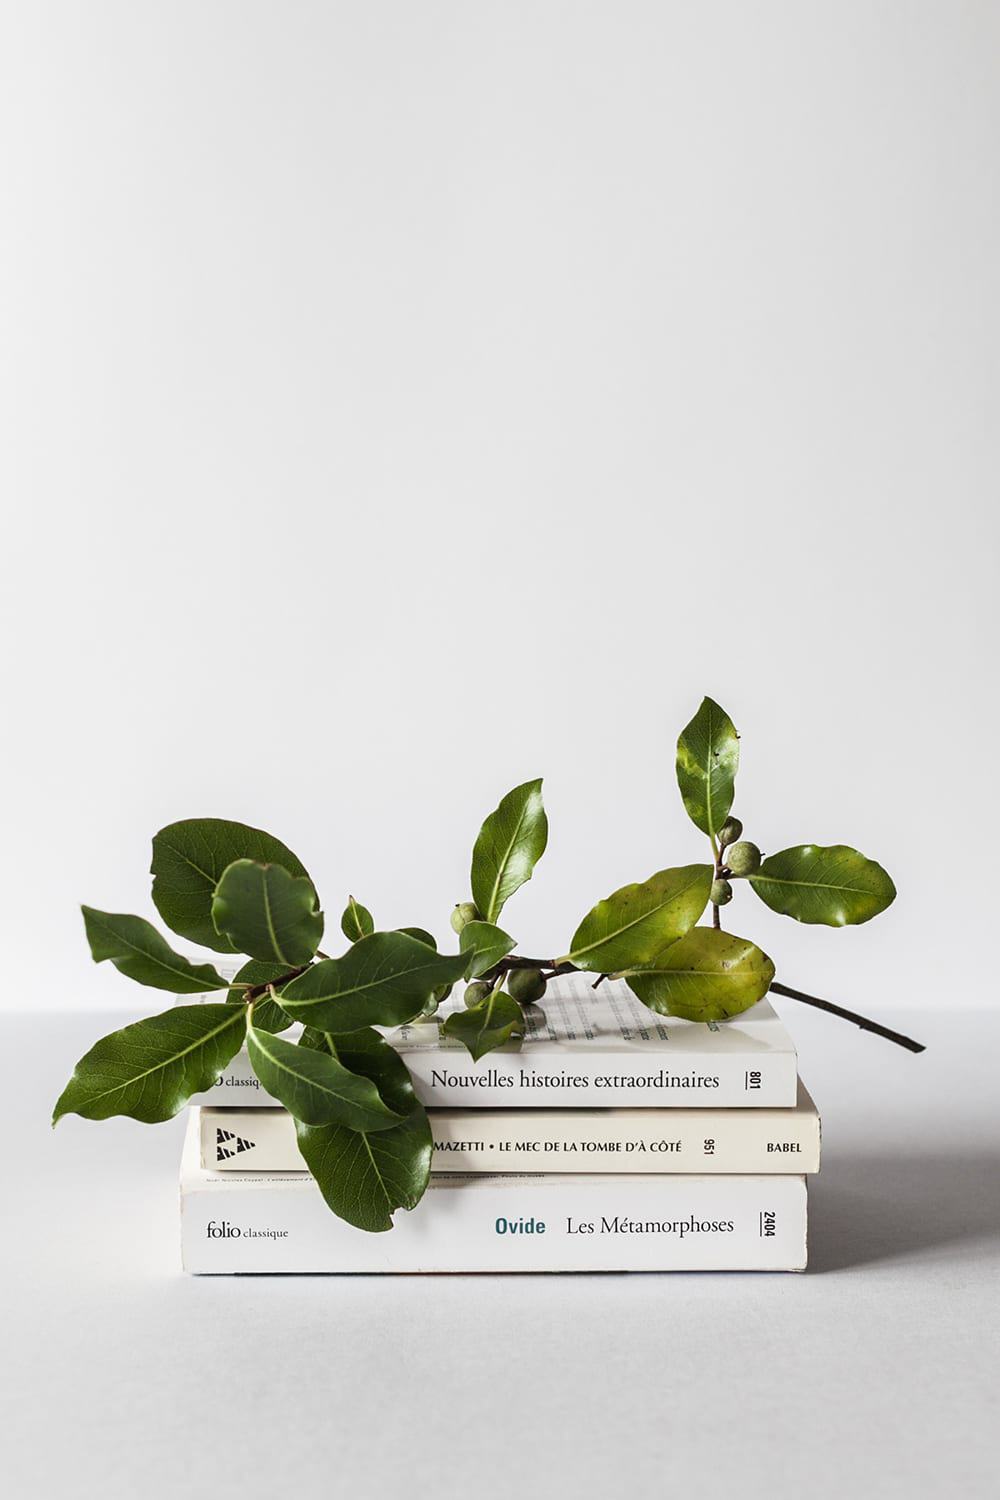 3 books on a white desk with a branch and leaves